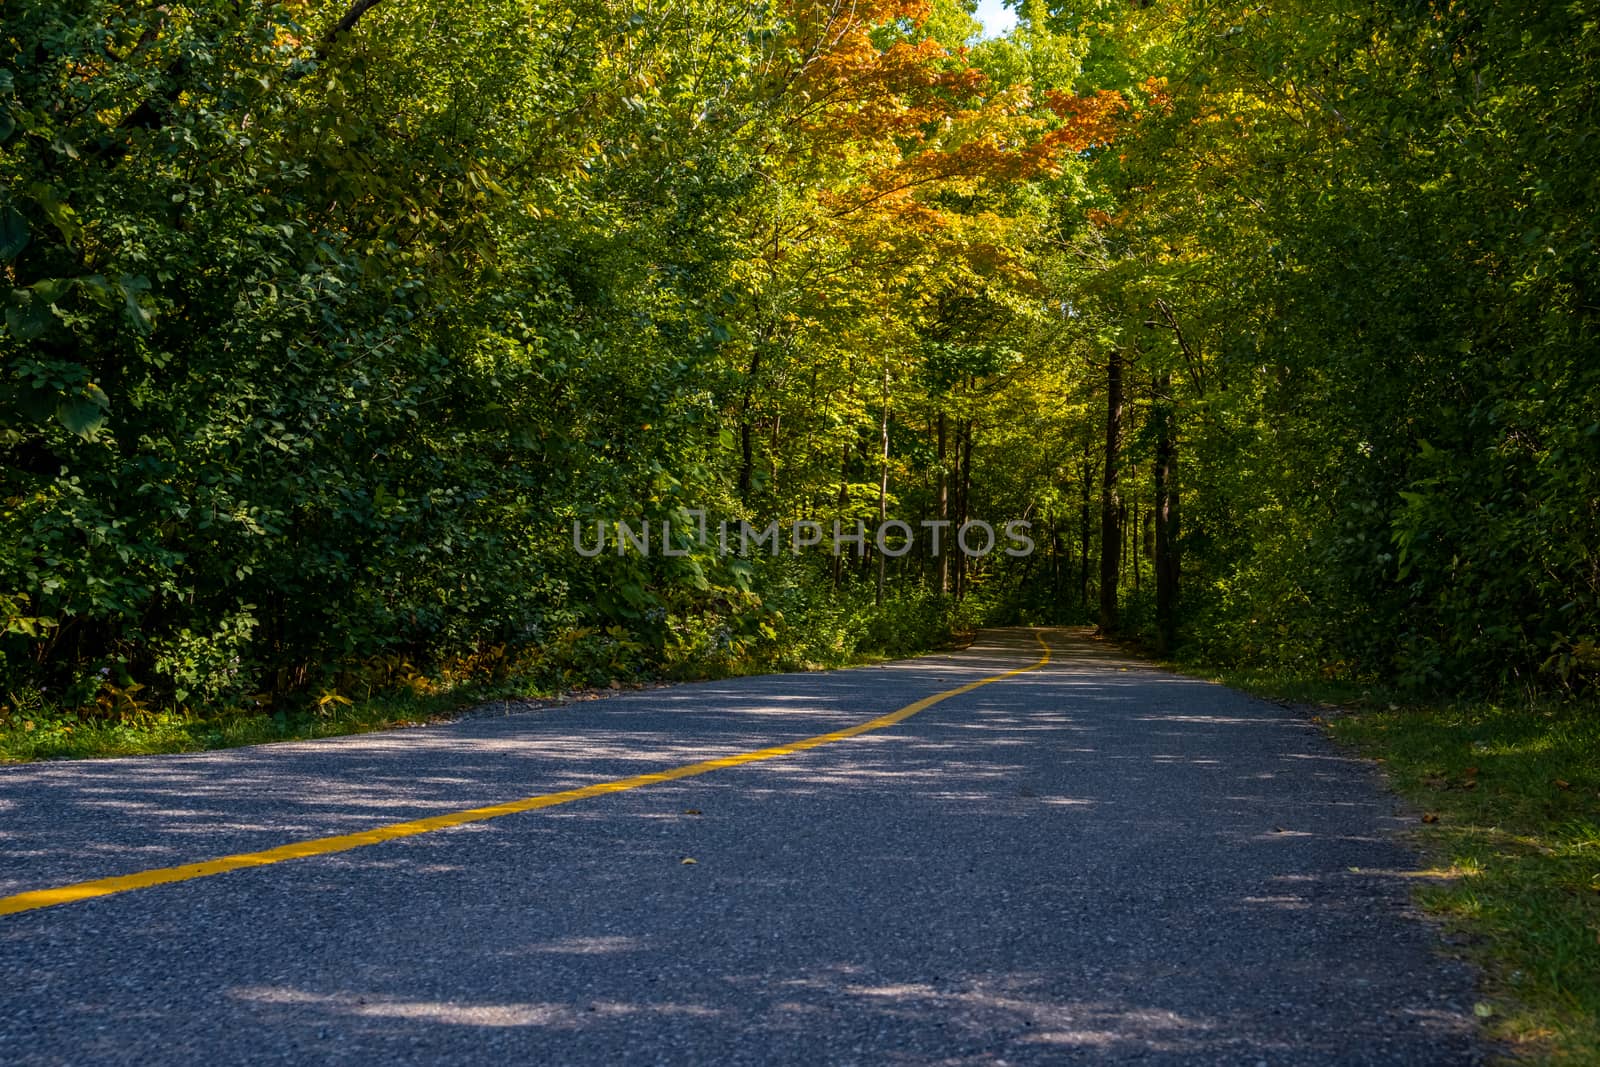 A paved bike path with a yellow painted line runs through a forested area. In early autumn, leaves of green, yellow wand orange line the pathway.